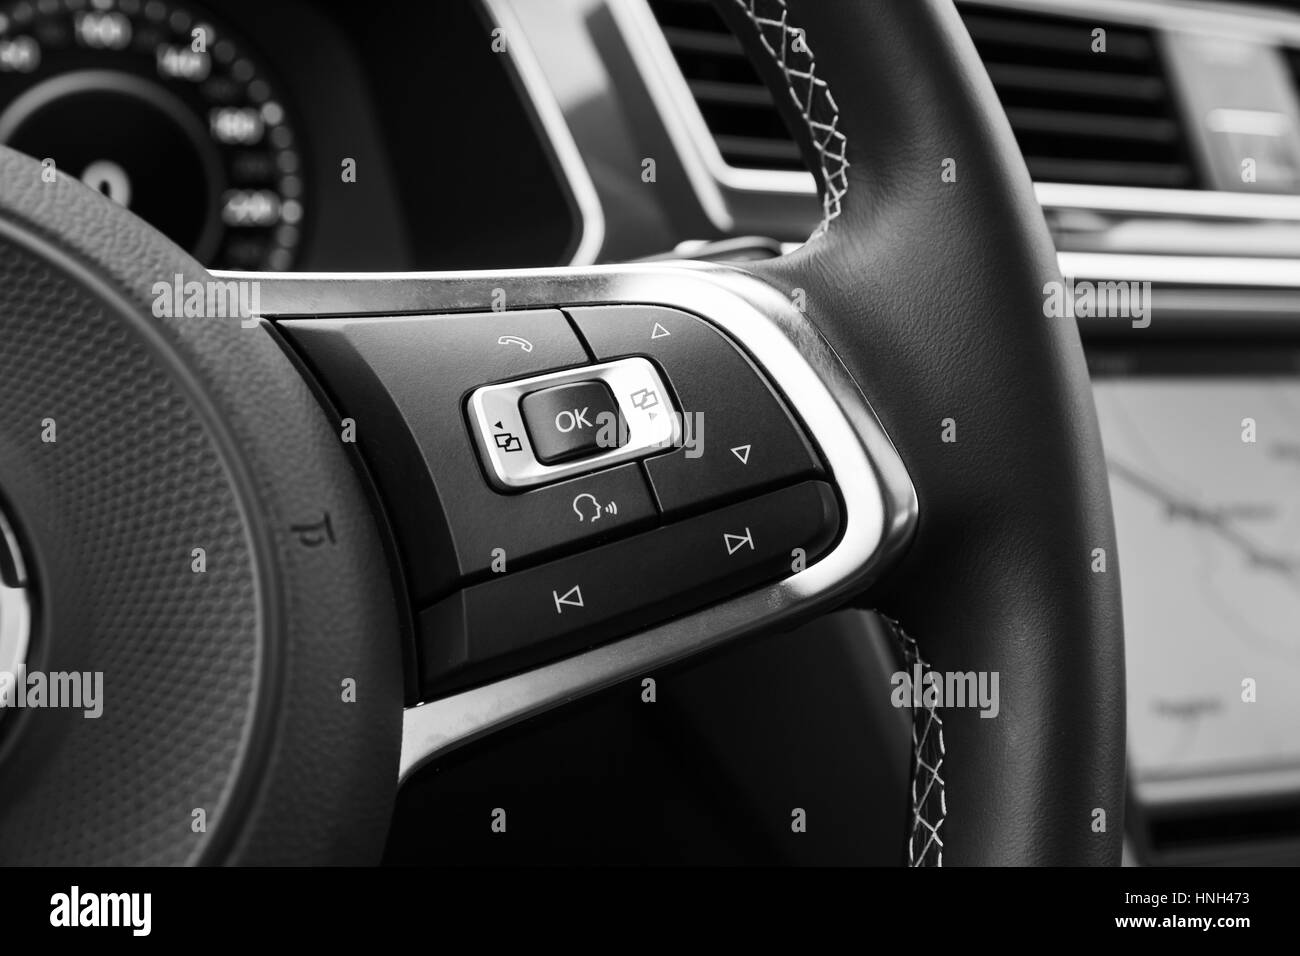 Control panel buttons on modern car steering wheel, interior details Stock Photo